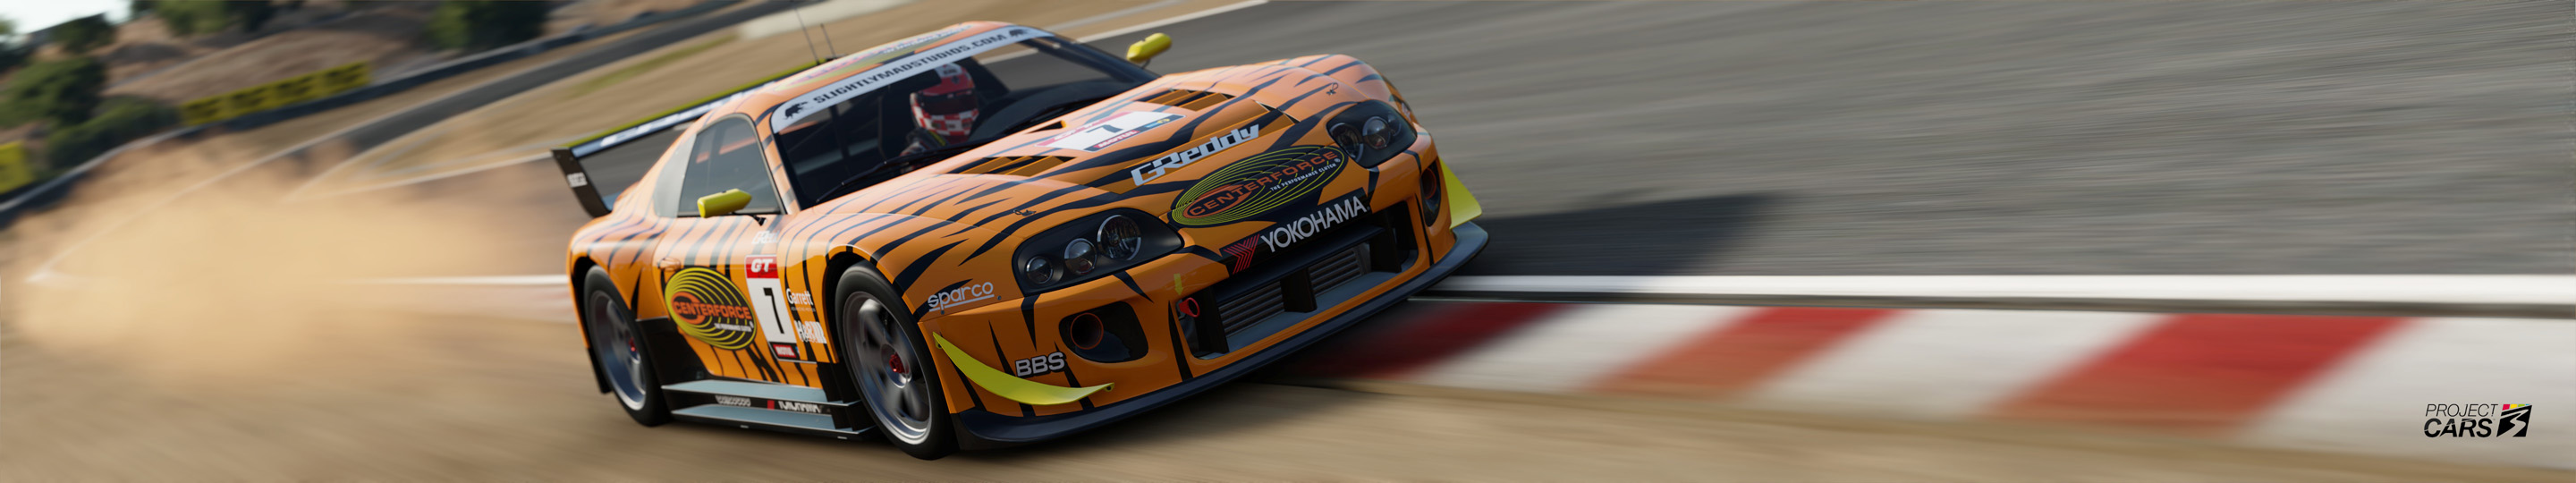 00 PROJECT CARS 3 new DLC 94 TOYOTA SUPRS MkIV RACING copy.jpg